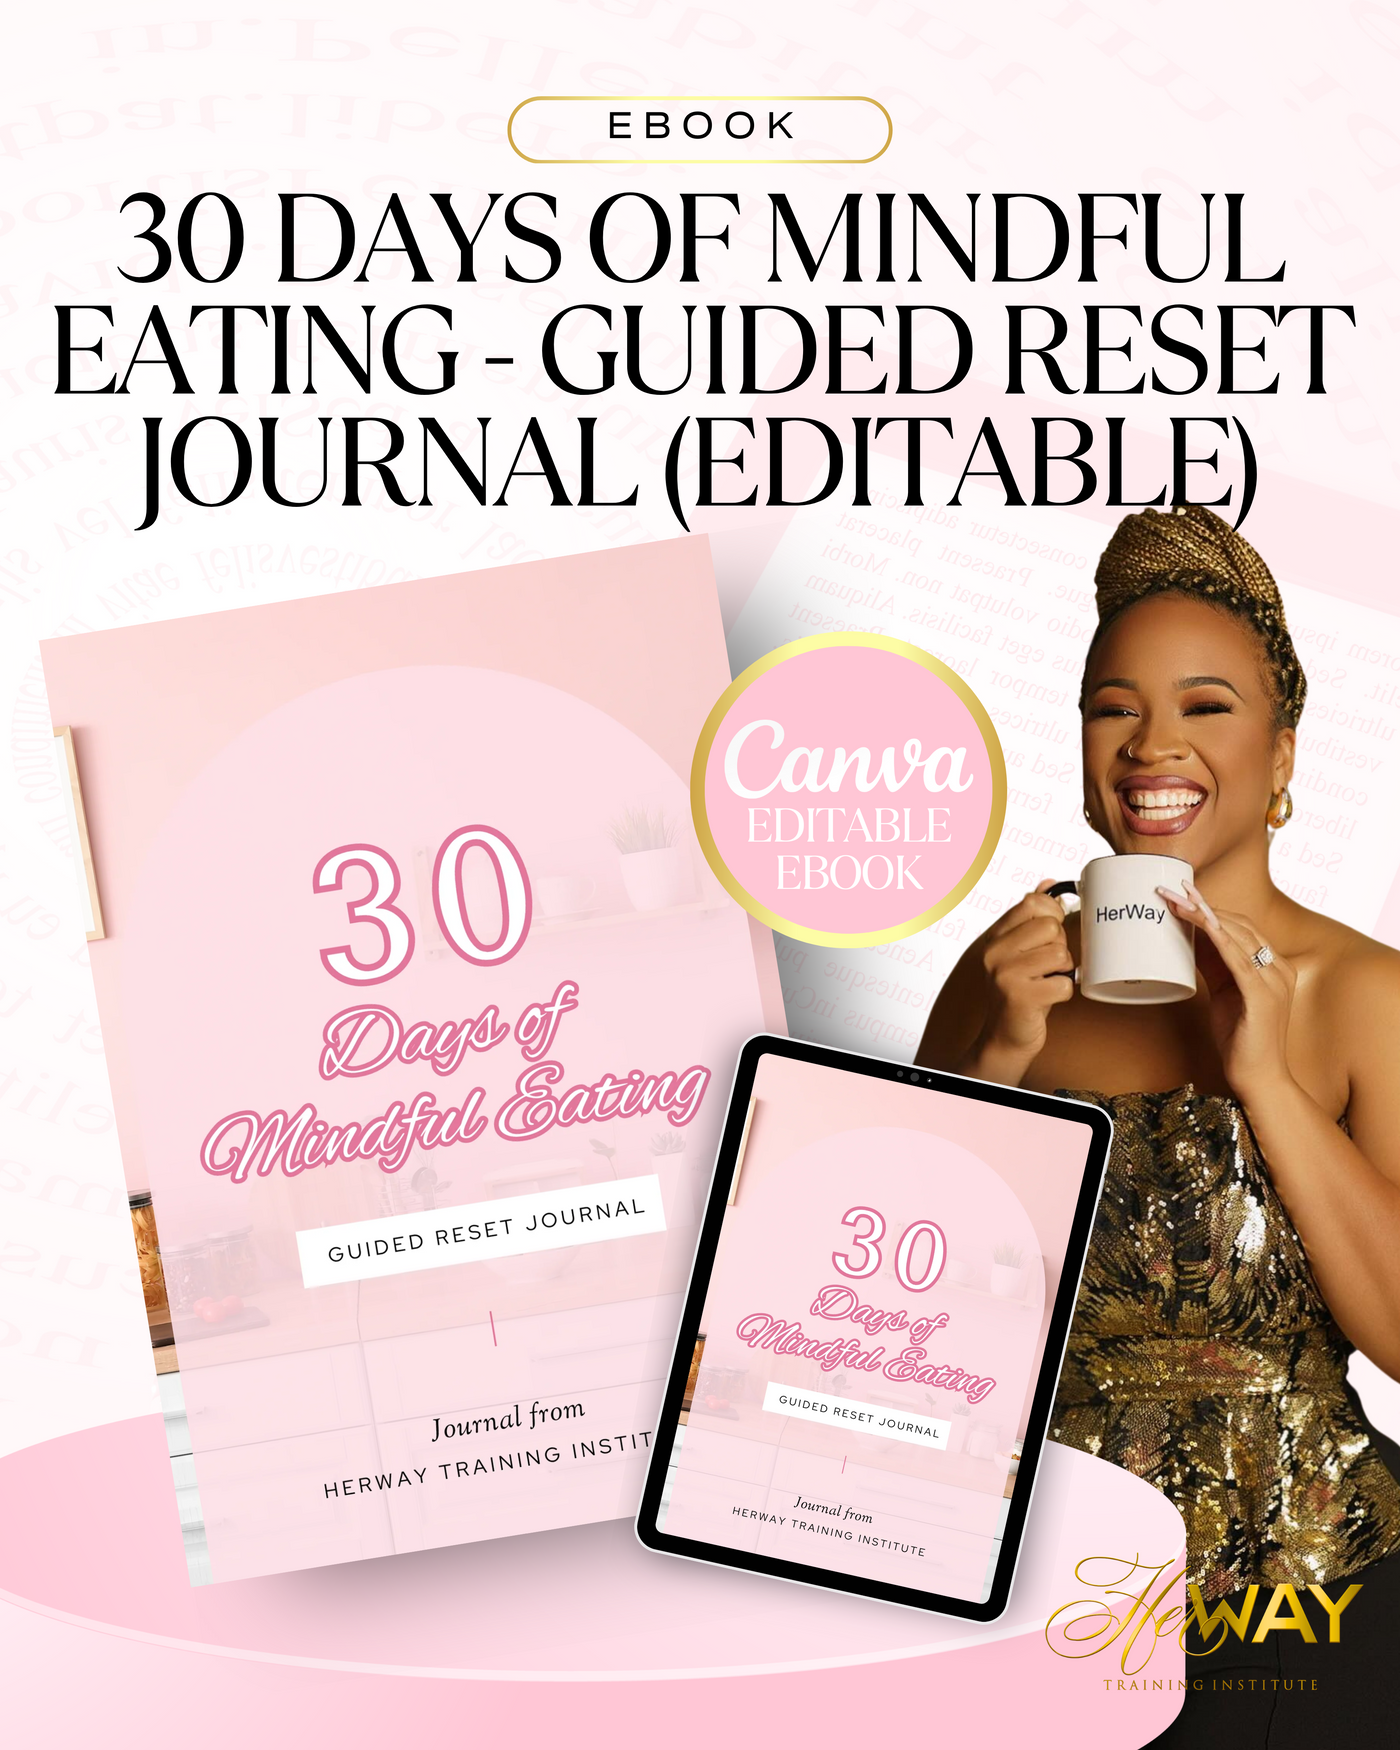 30 Days of Mindful Eating - Guided Reset Journal EDITABLE